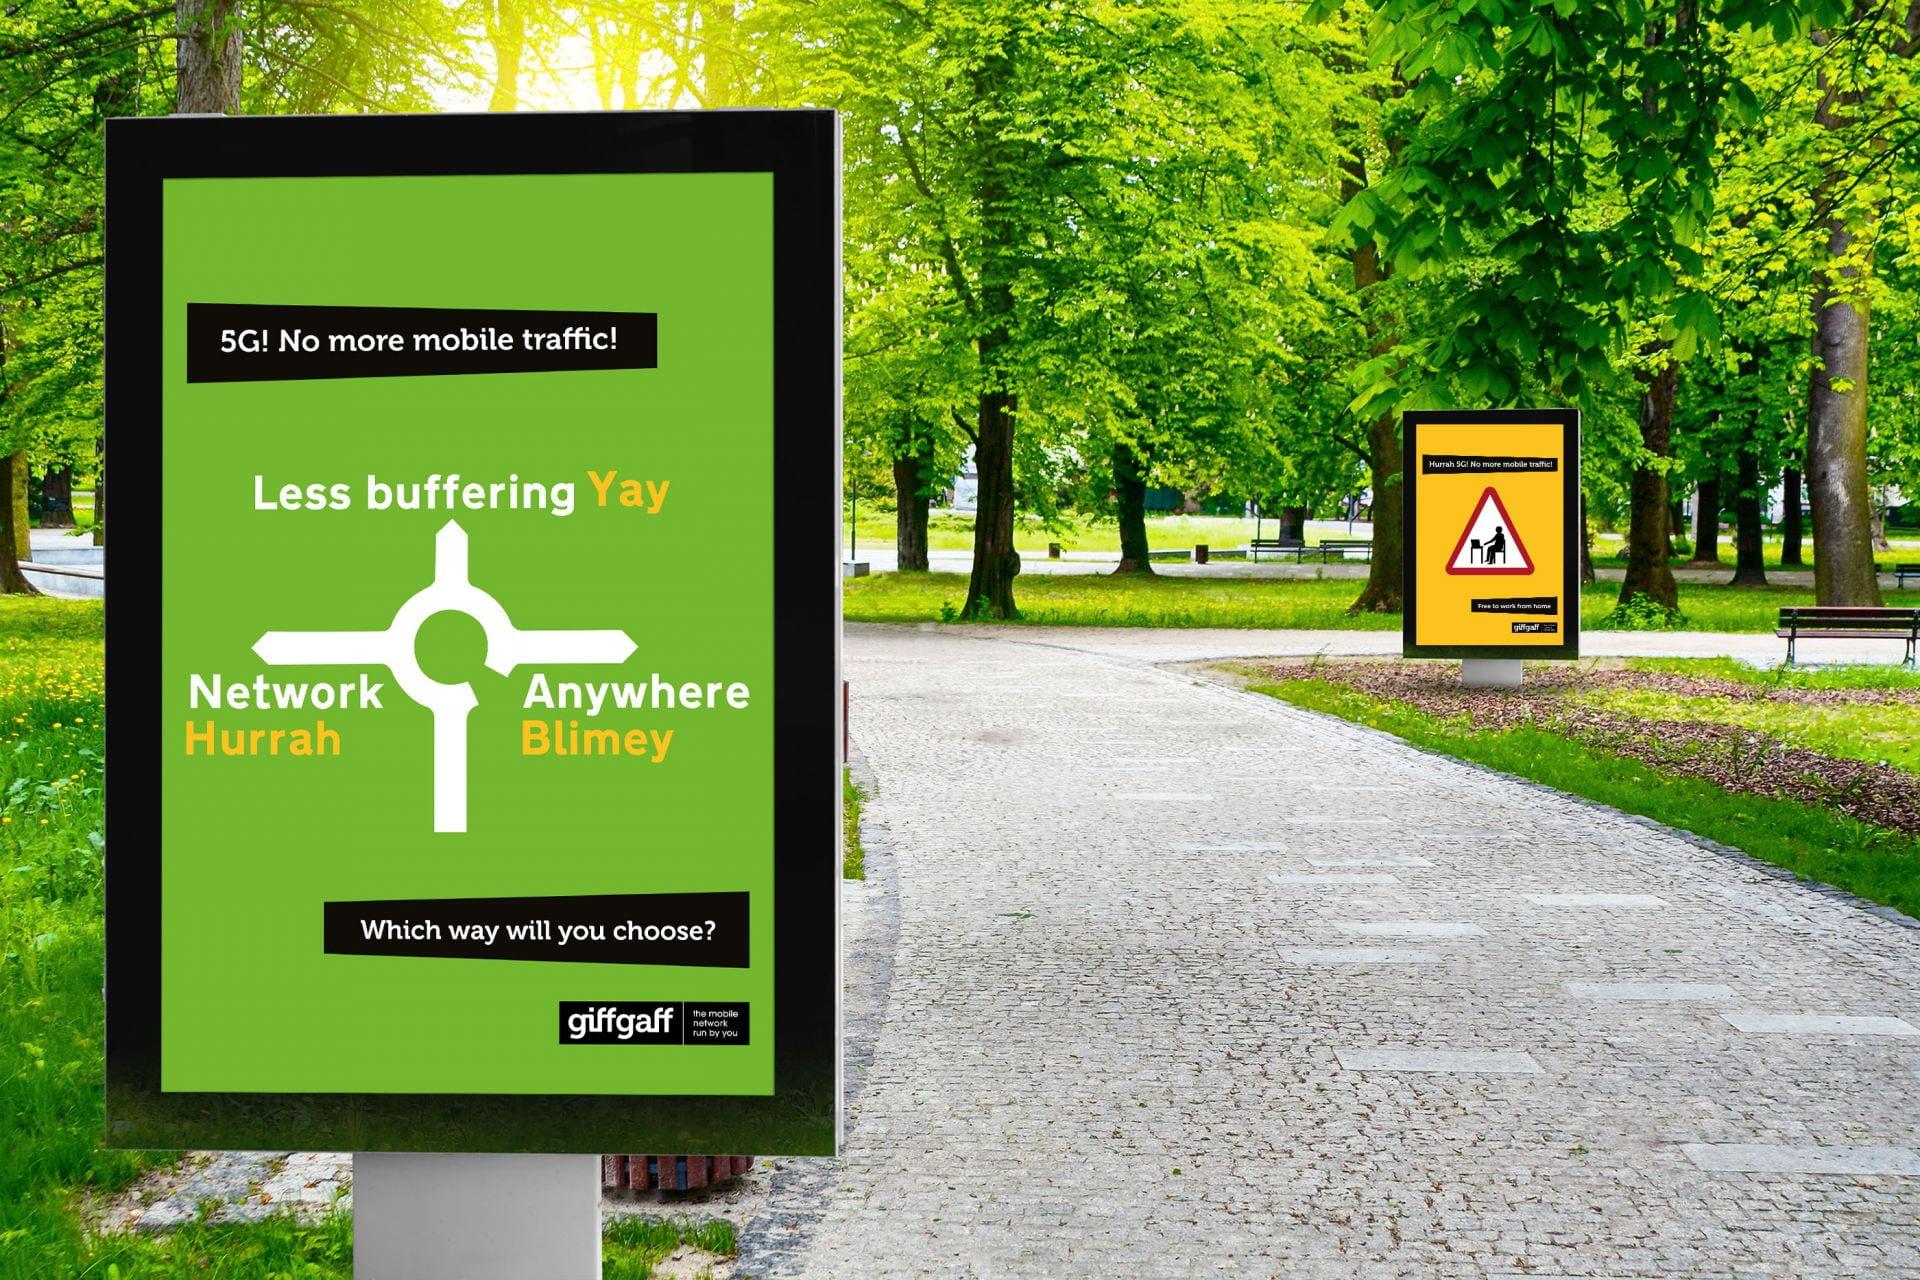 Photograph of a a sign in a park with posters for giffgaff.